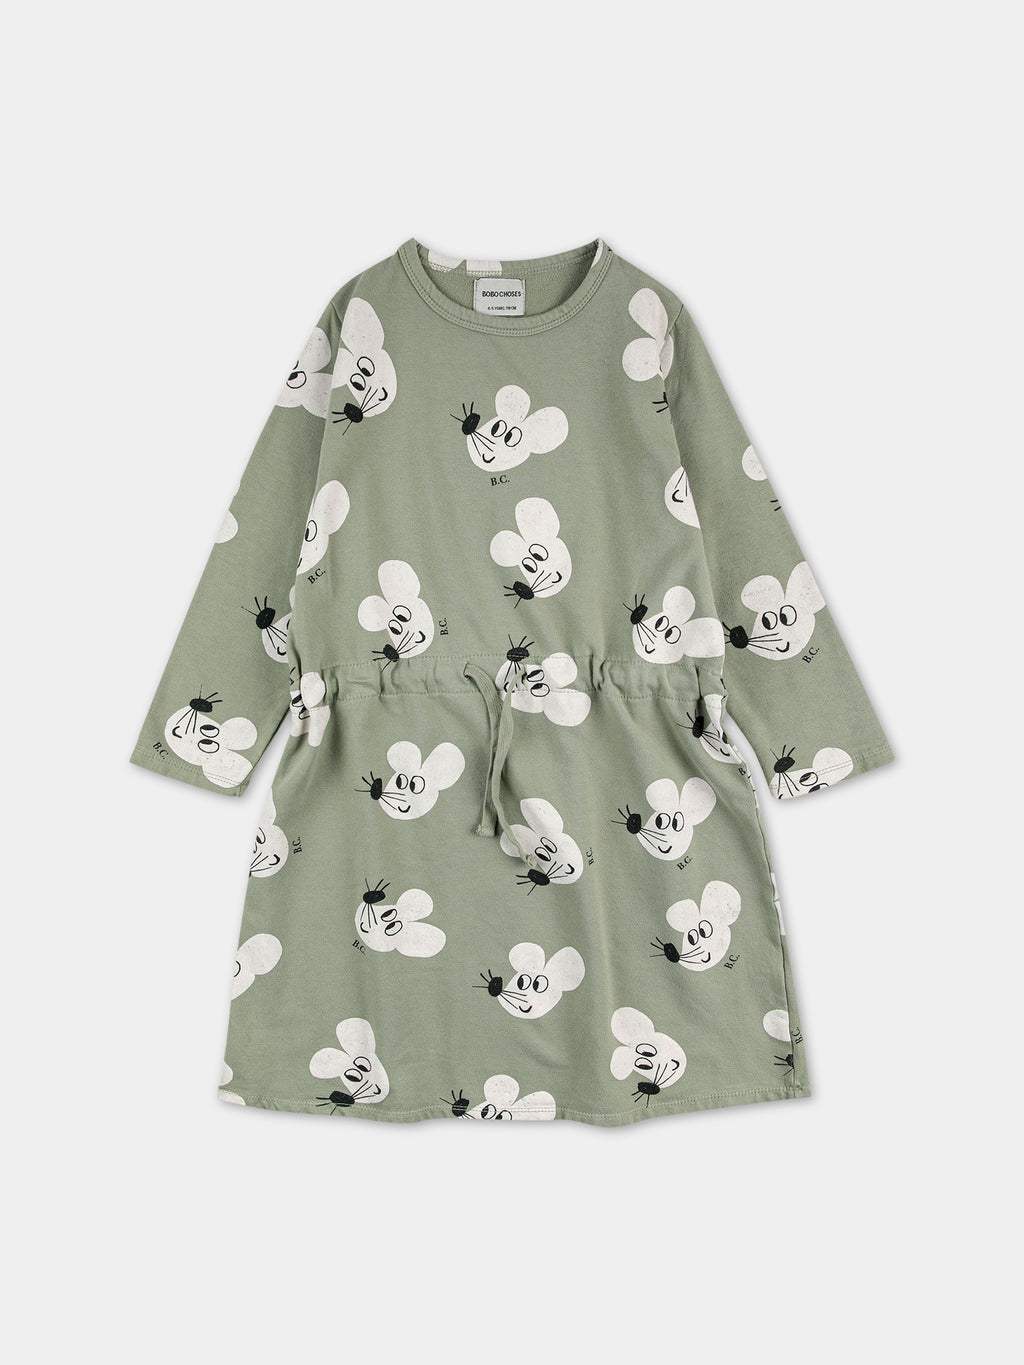 Green dress for girl with mice print